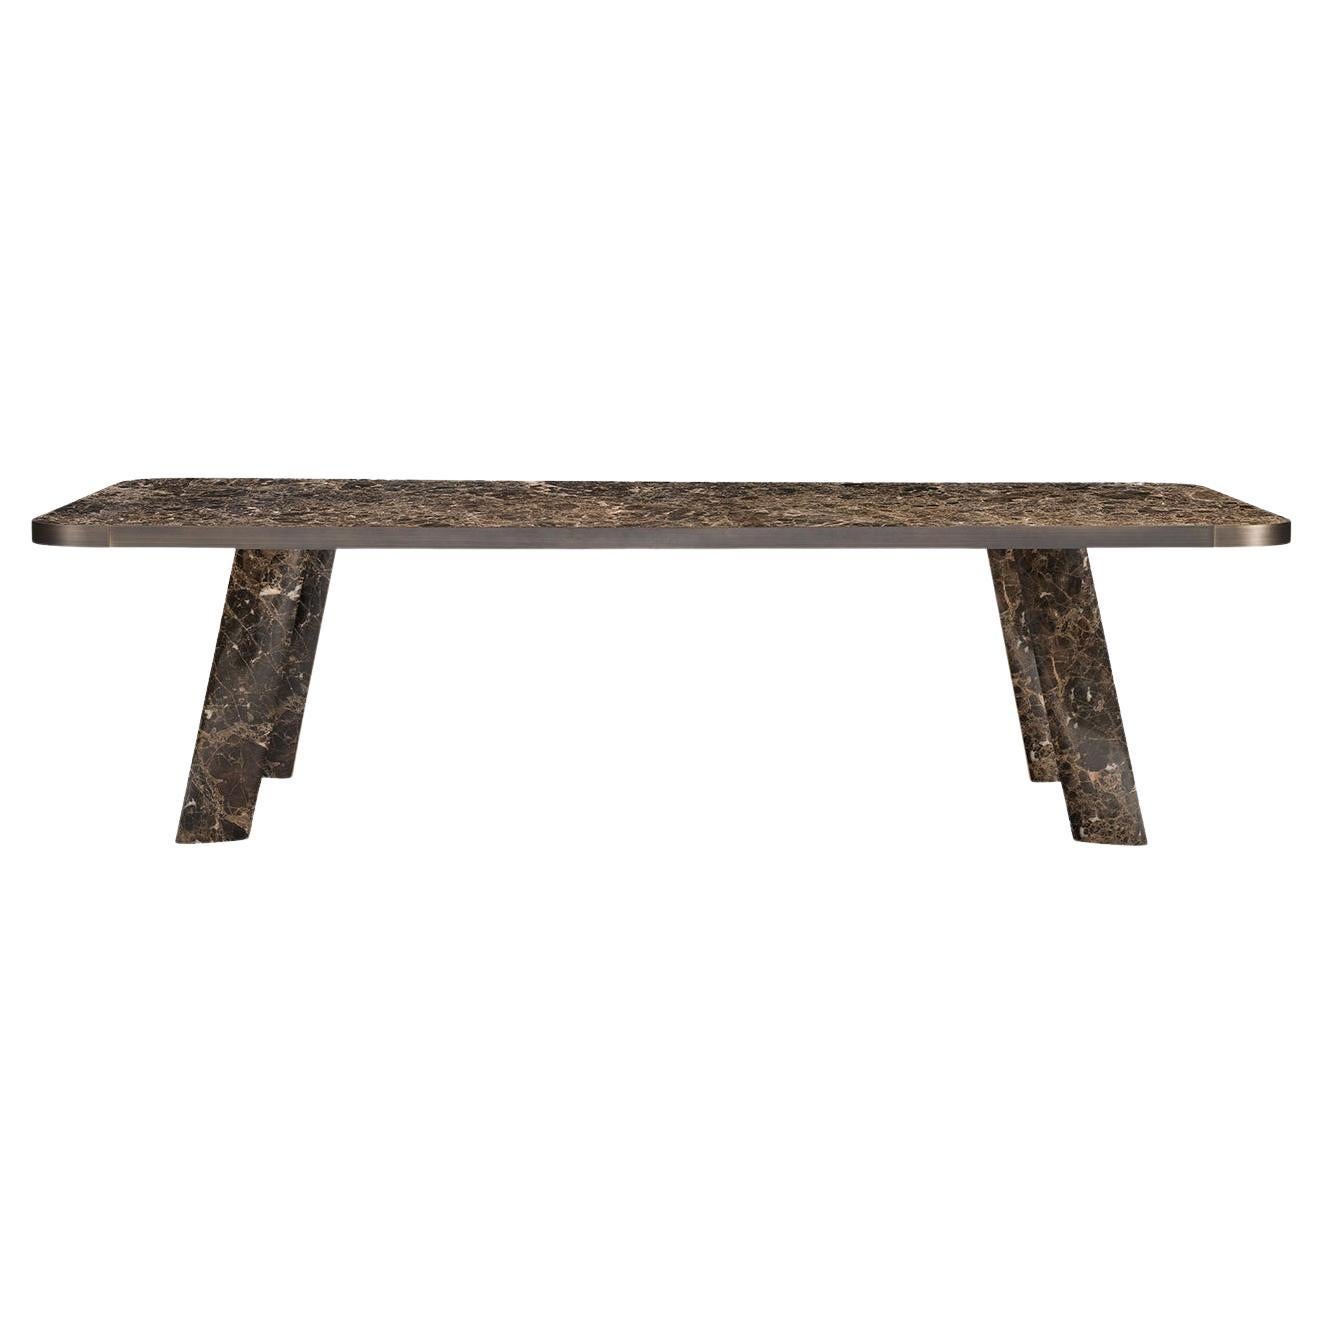 Native Dark Emperador Rectangular Dining Table by S. Giovannoni For Sale